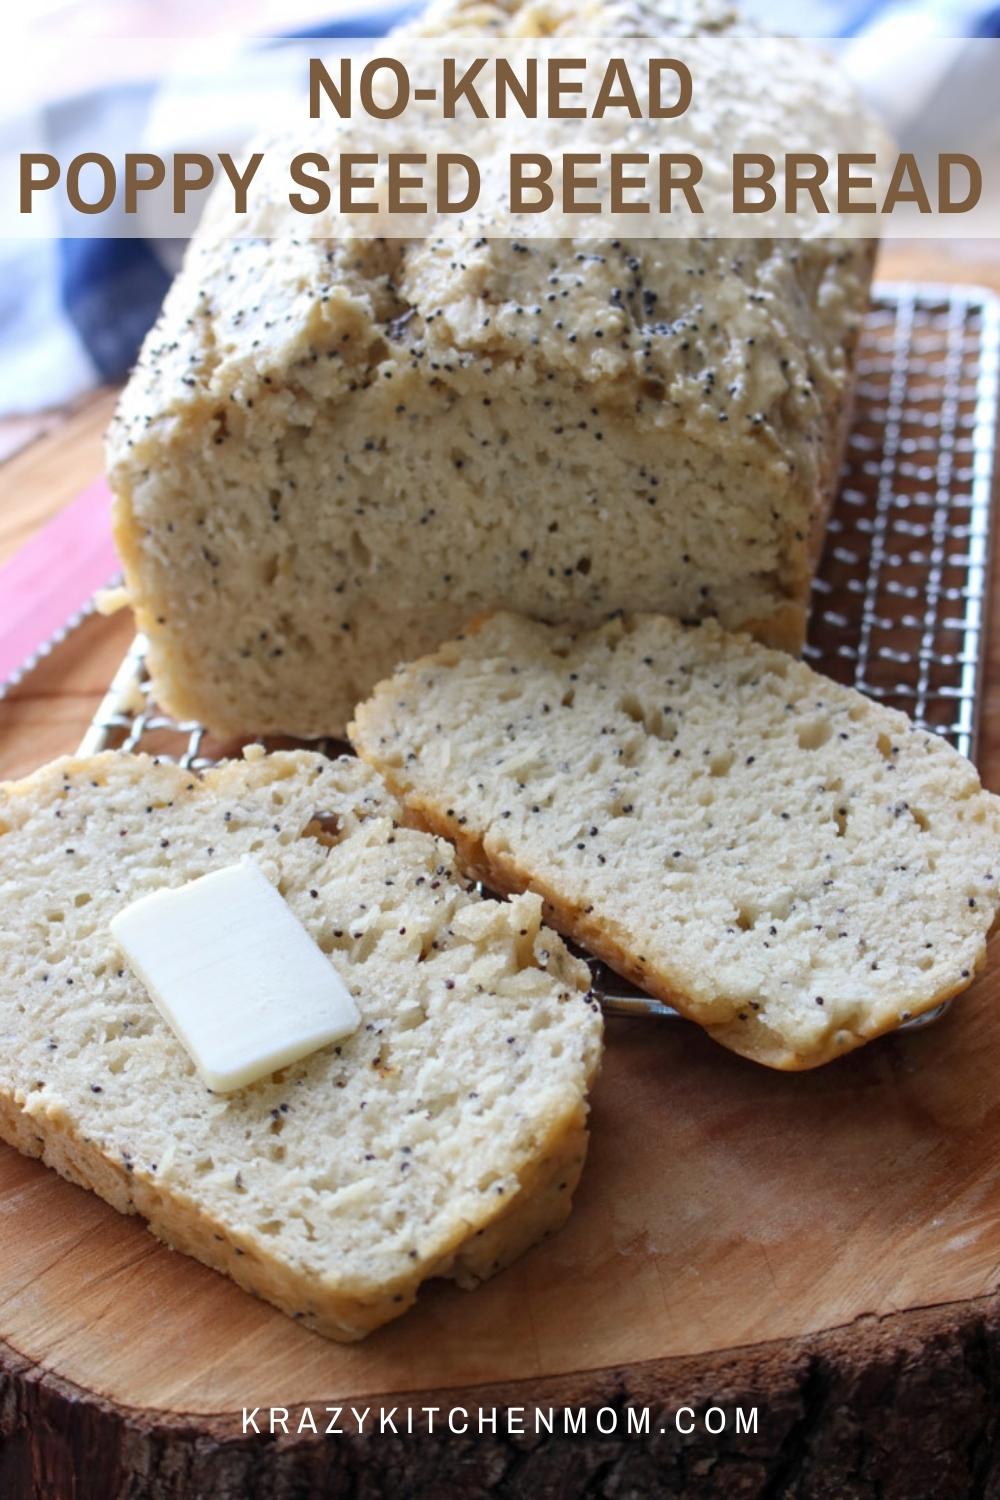 Super simple quick no-knead poppy seed beer bread - no kneading and no mixer. Just combine, stir, bake, ready in 1 hour. Buttery, sweet, moist, and delicious. via @krazykitchenmom